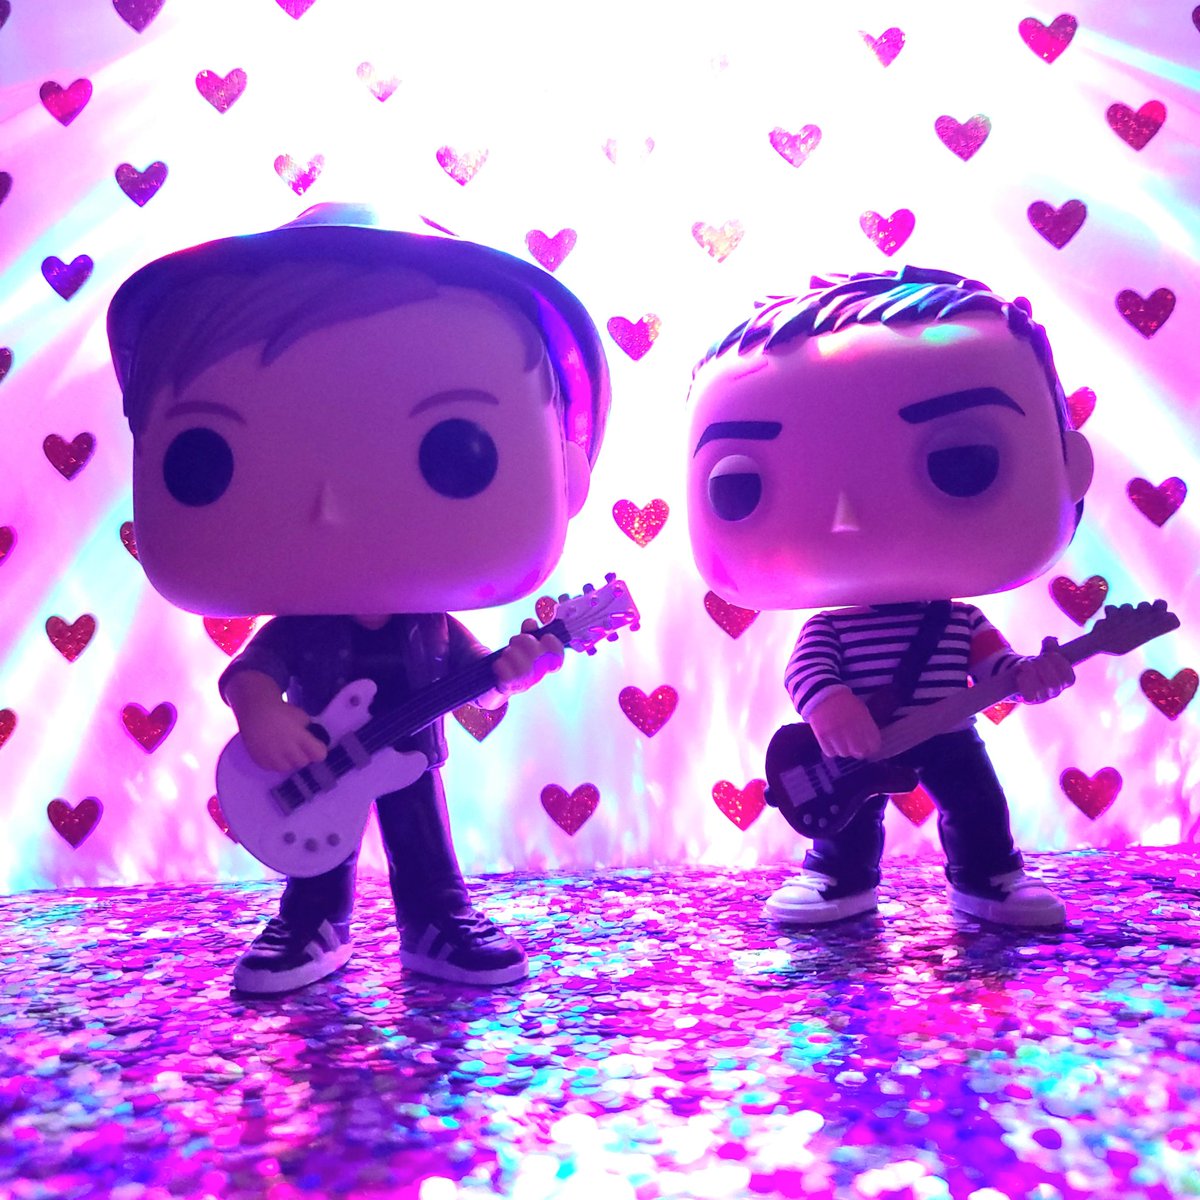 2/12: Love Song Love song with a rock vibe! My husband actually danced into our wedding reception to a Fall Out Boy song, great memories of a love filled day! @OriginalFunko #FunkoPhotoADayChallenge